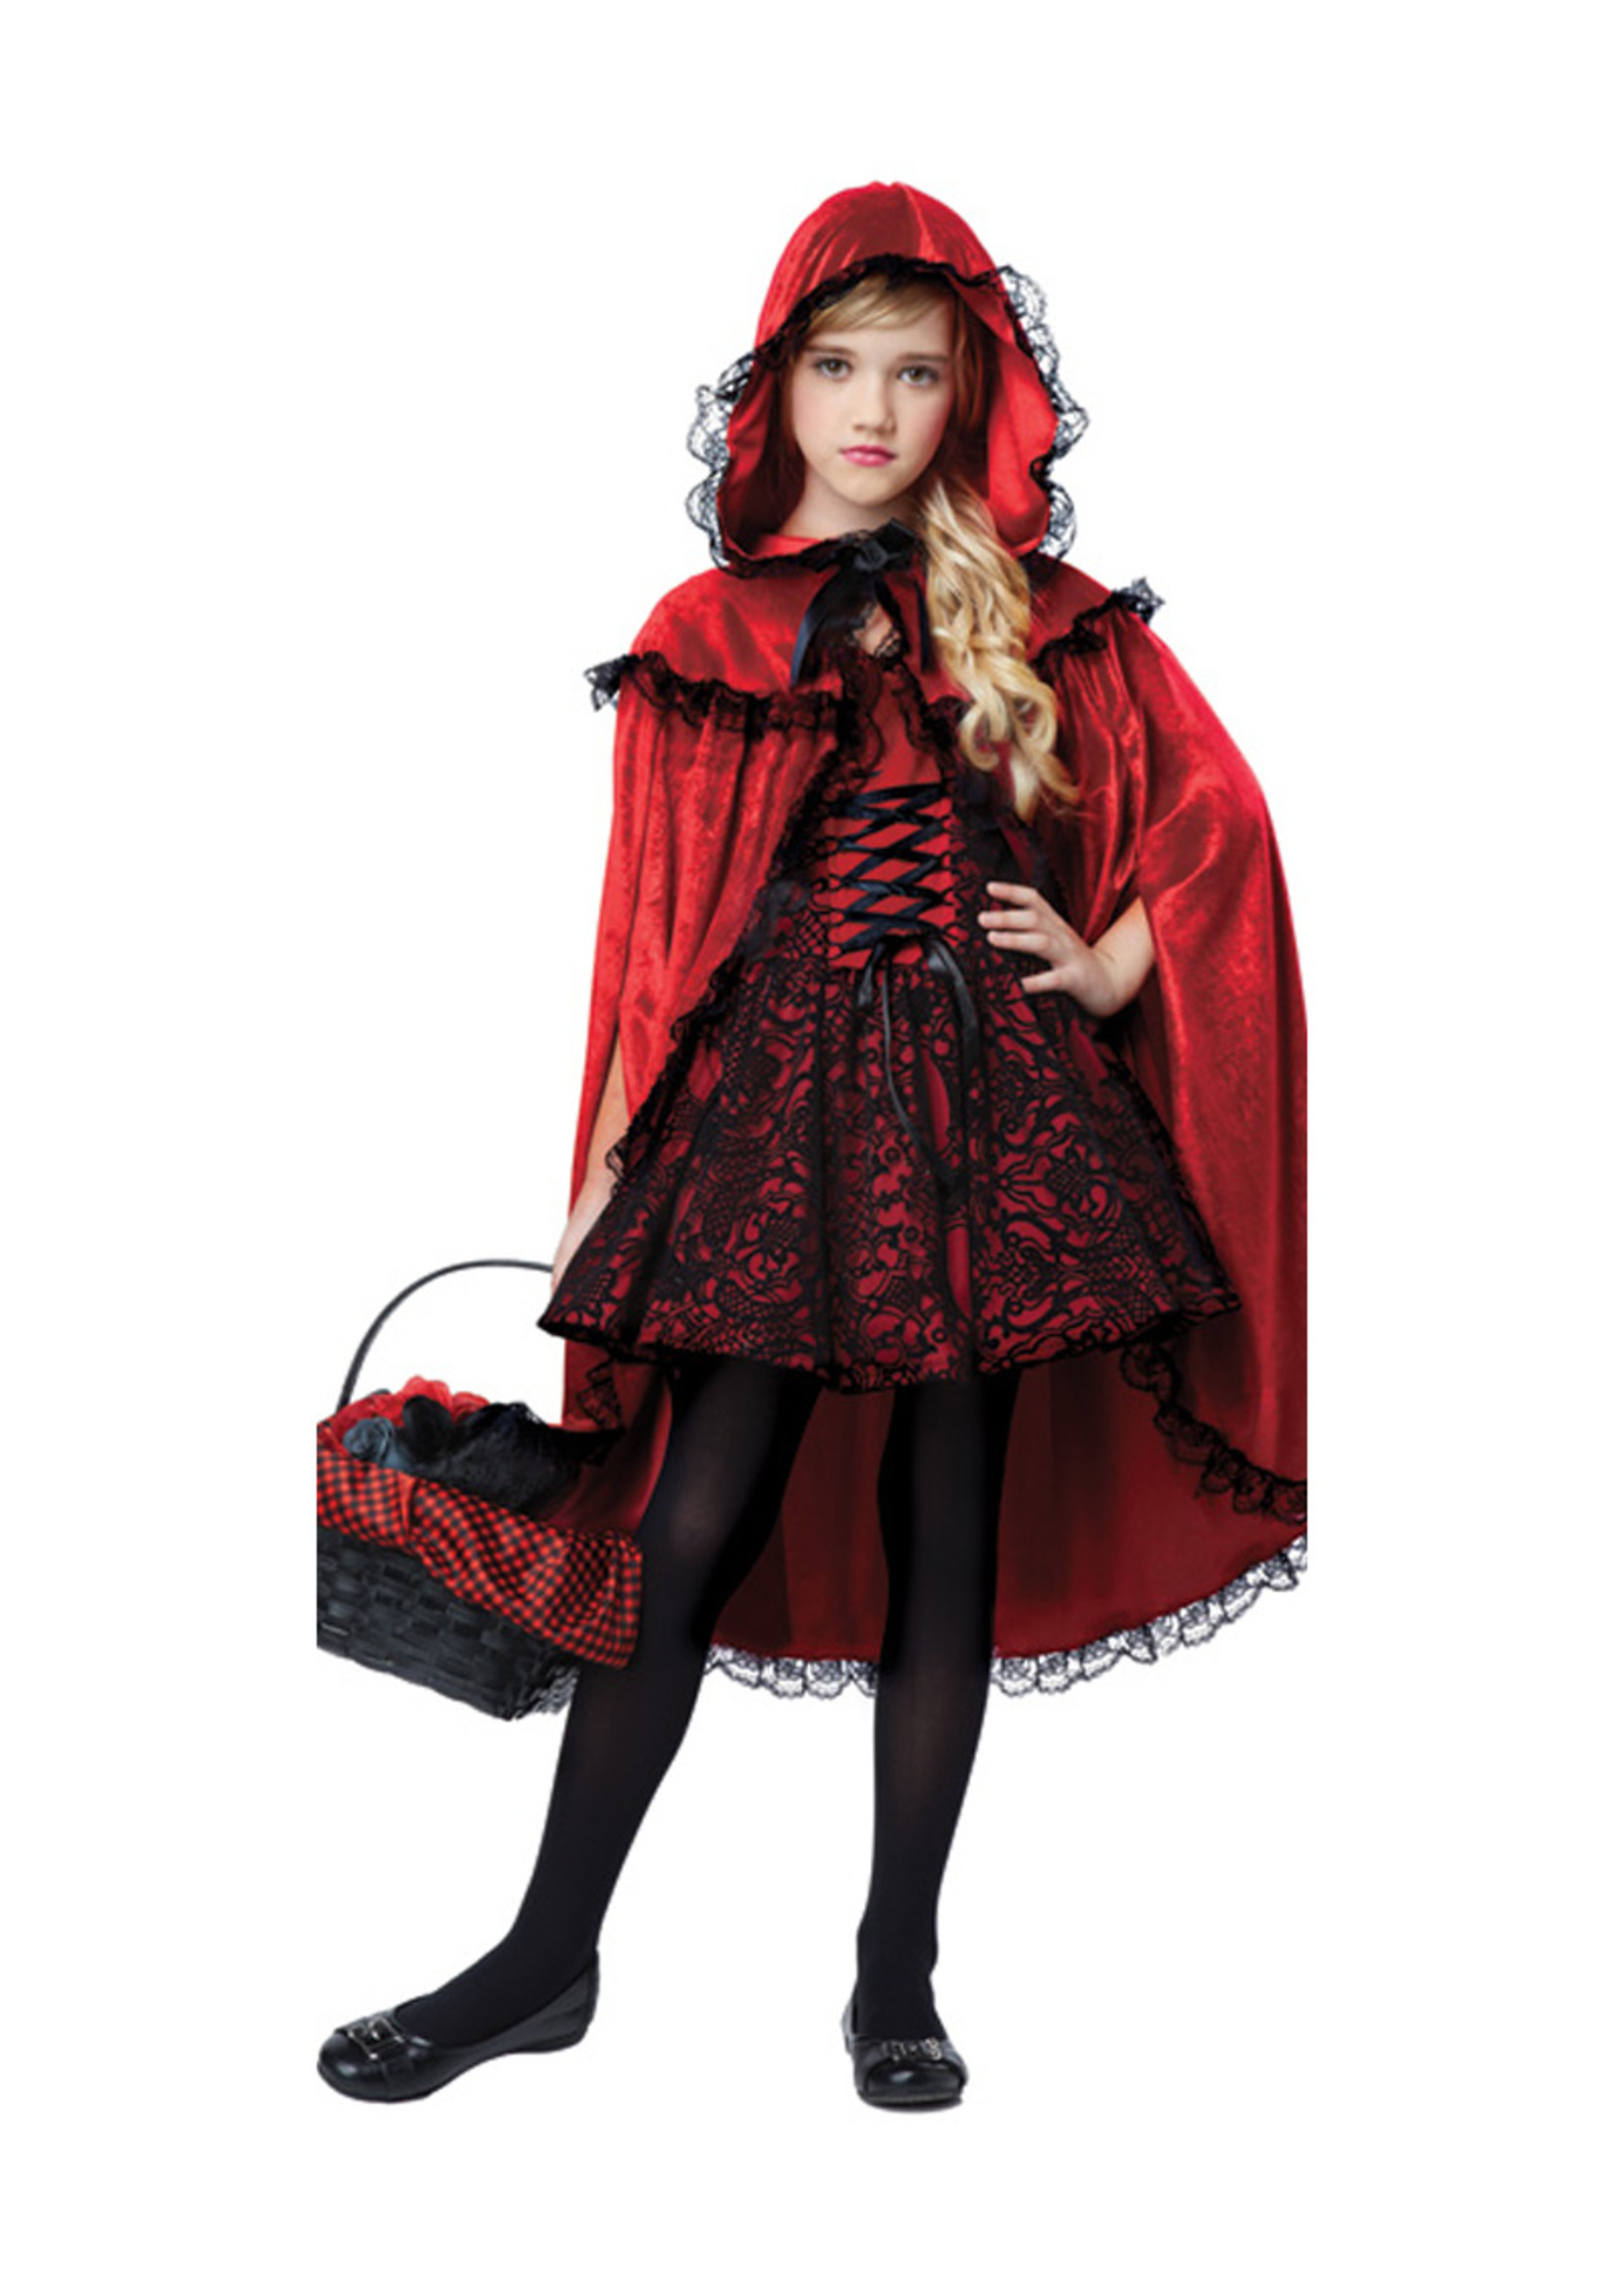 Red Riding Hood Deluxe Costume - Girls